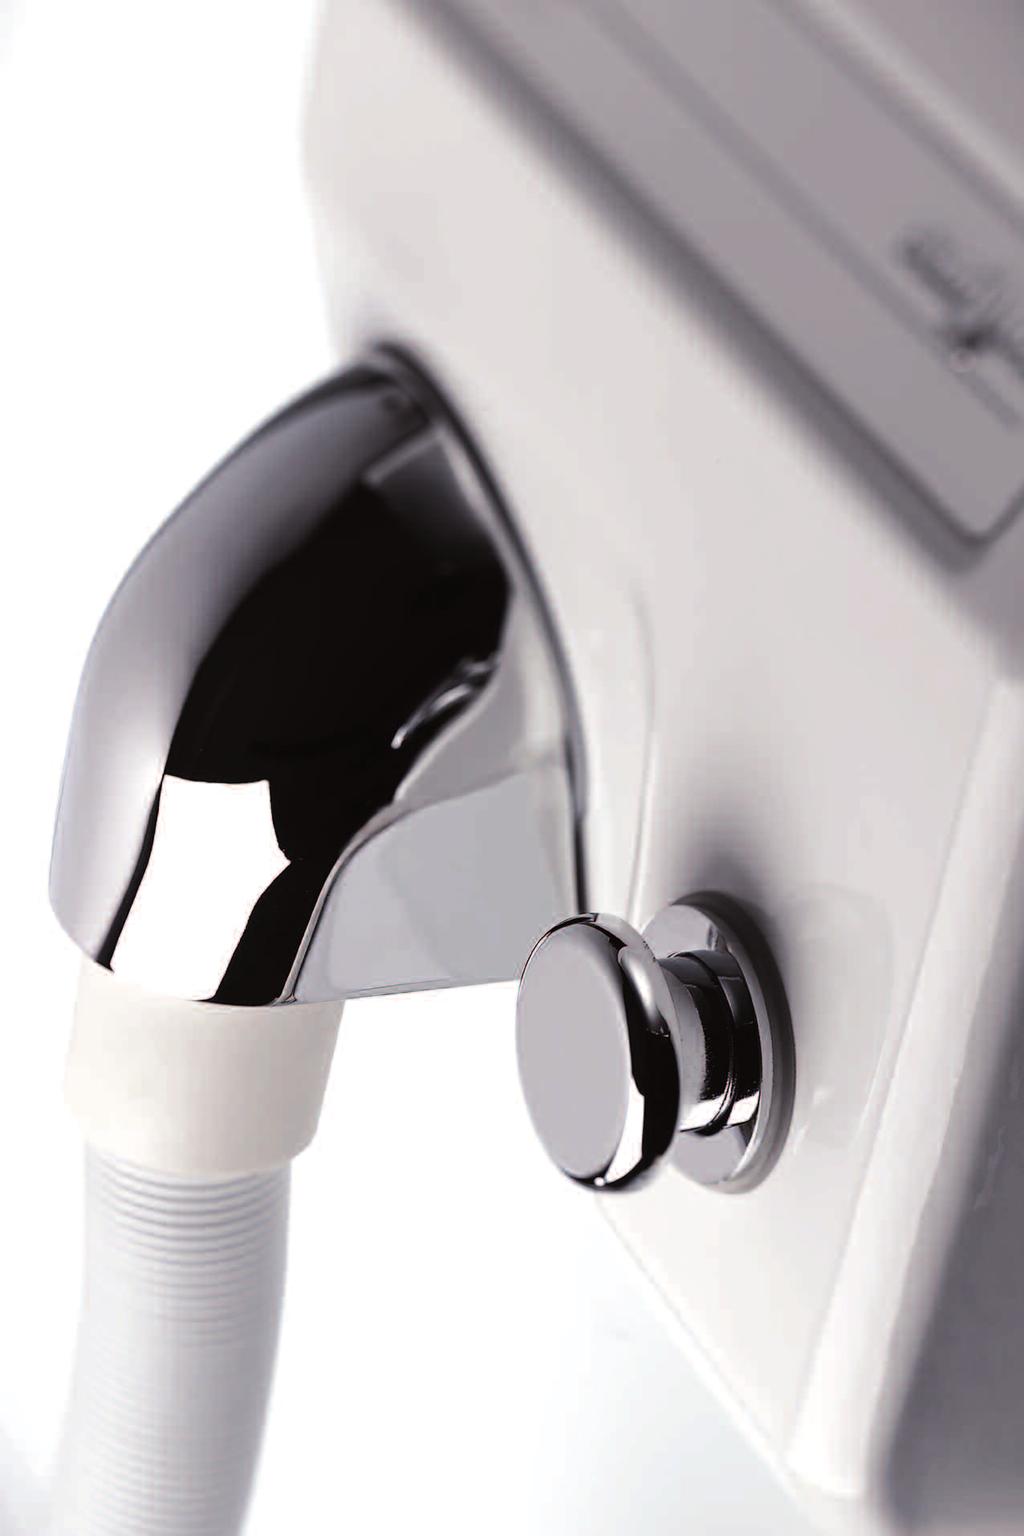 8 WARM AIR HAIR DRYERS Often overlooked at a buildings design stage, the hair dryer is recommended in any changing facility.